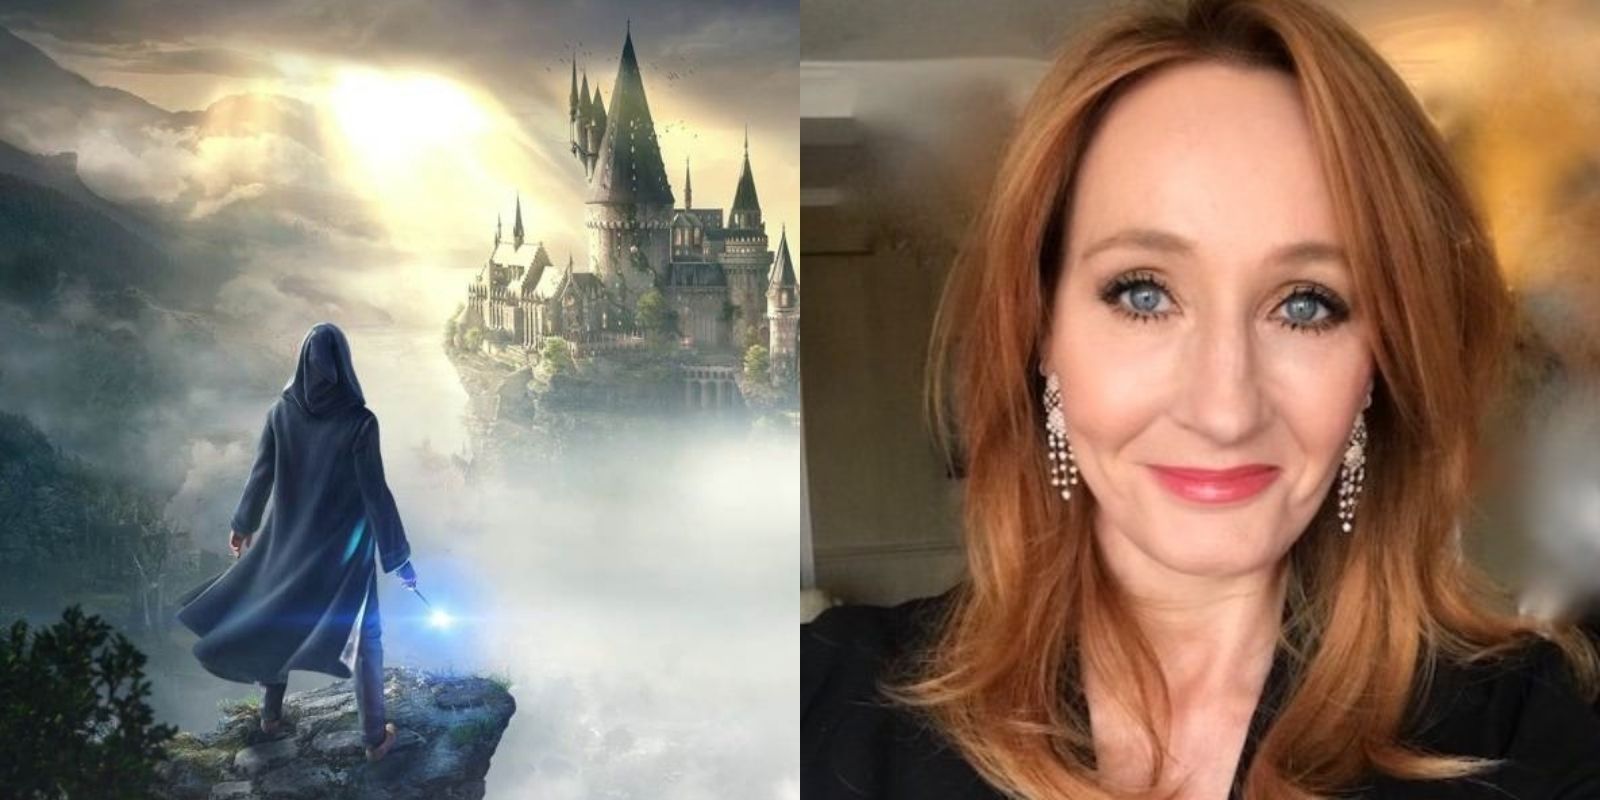 Split Screen image of the cover art for Hogwarts Legacy next to J. K. Rowling's author photo